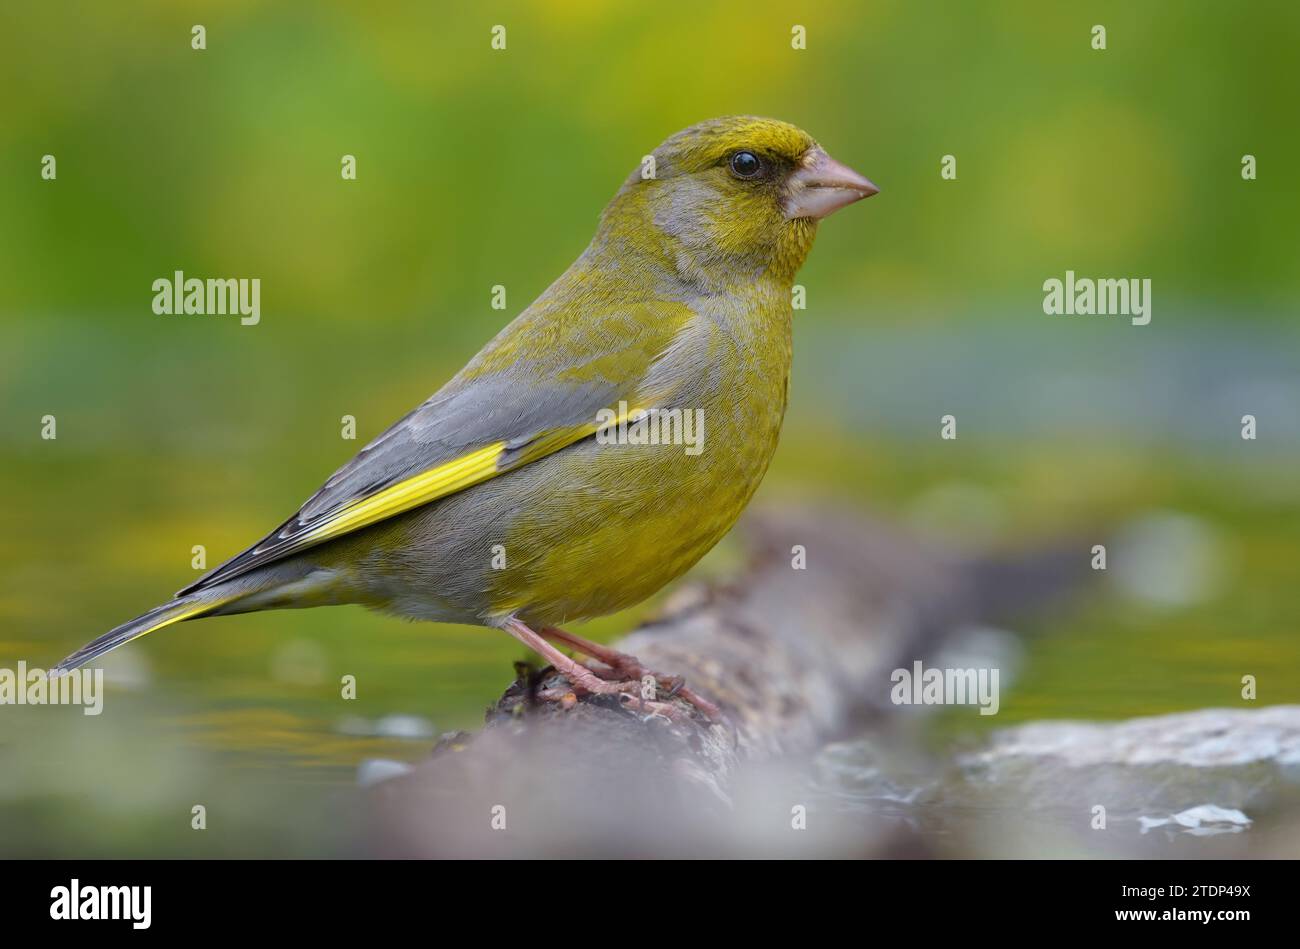 Male European Greenfinch (Chloris chloris) sitting on wet old looking branch with nice green background Stock Photo